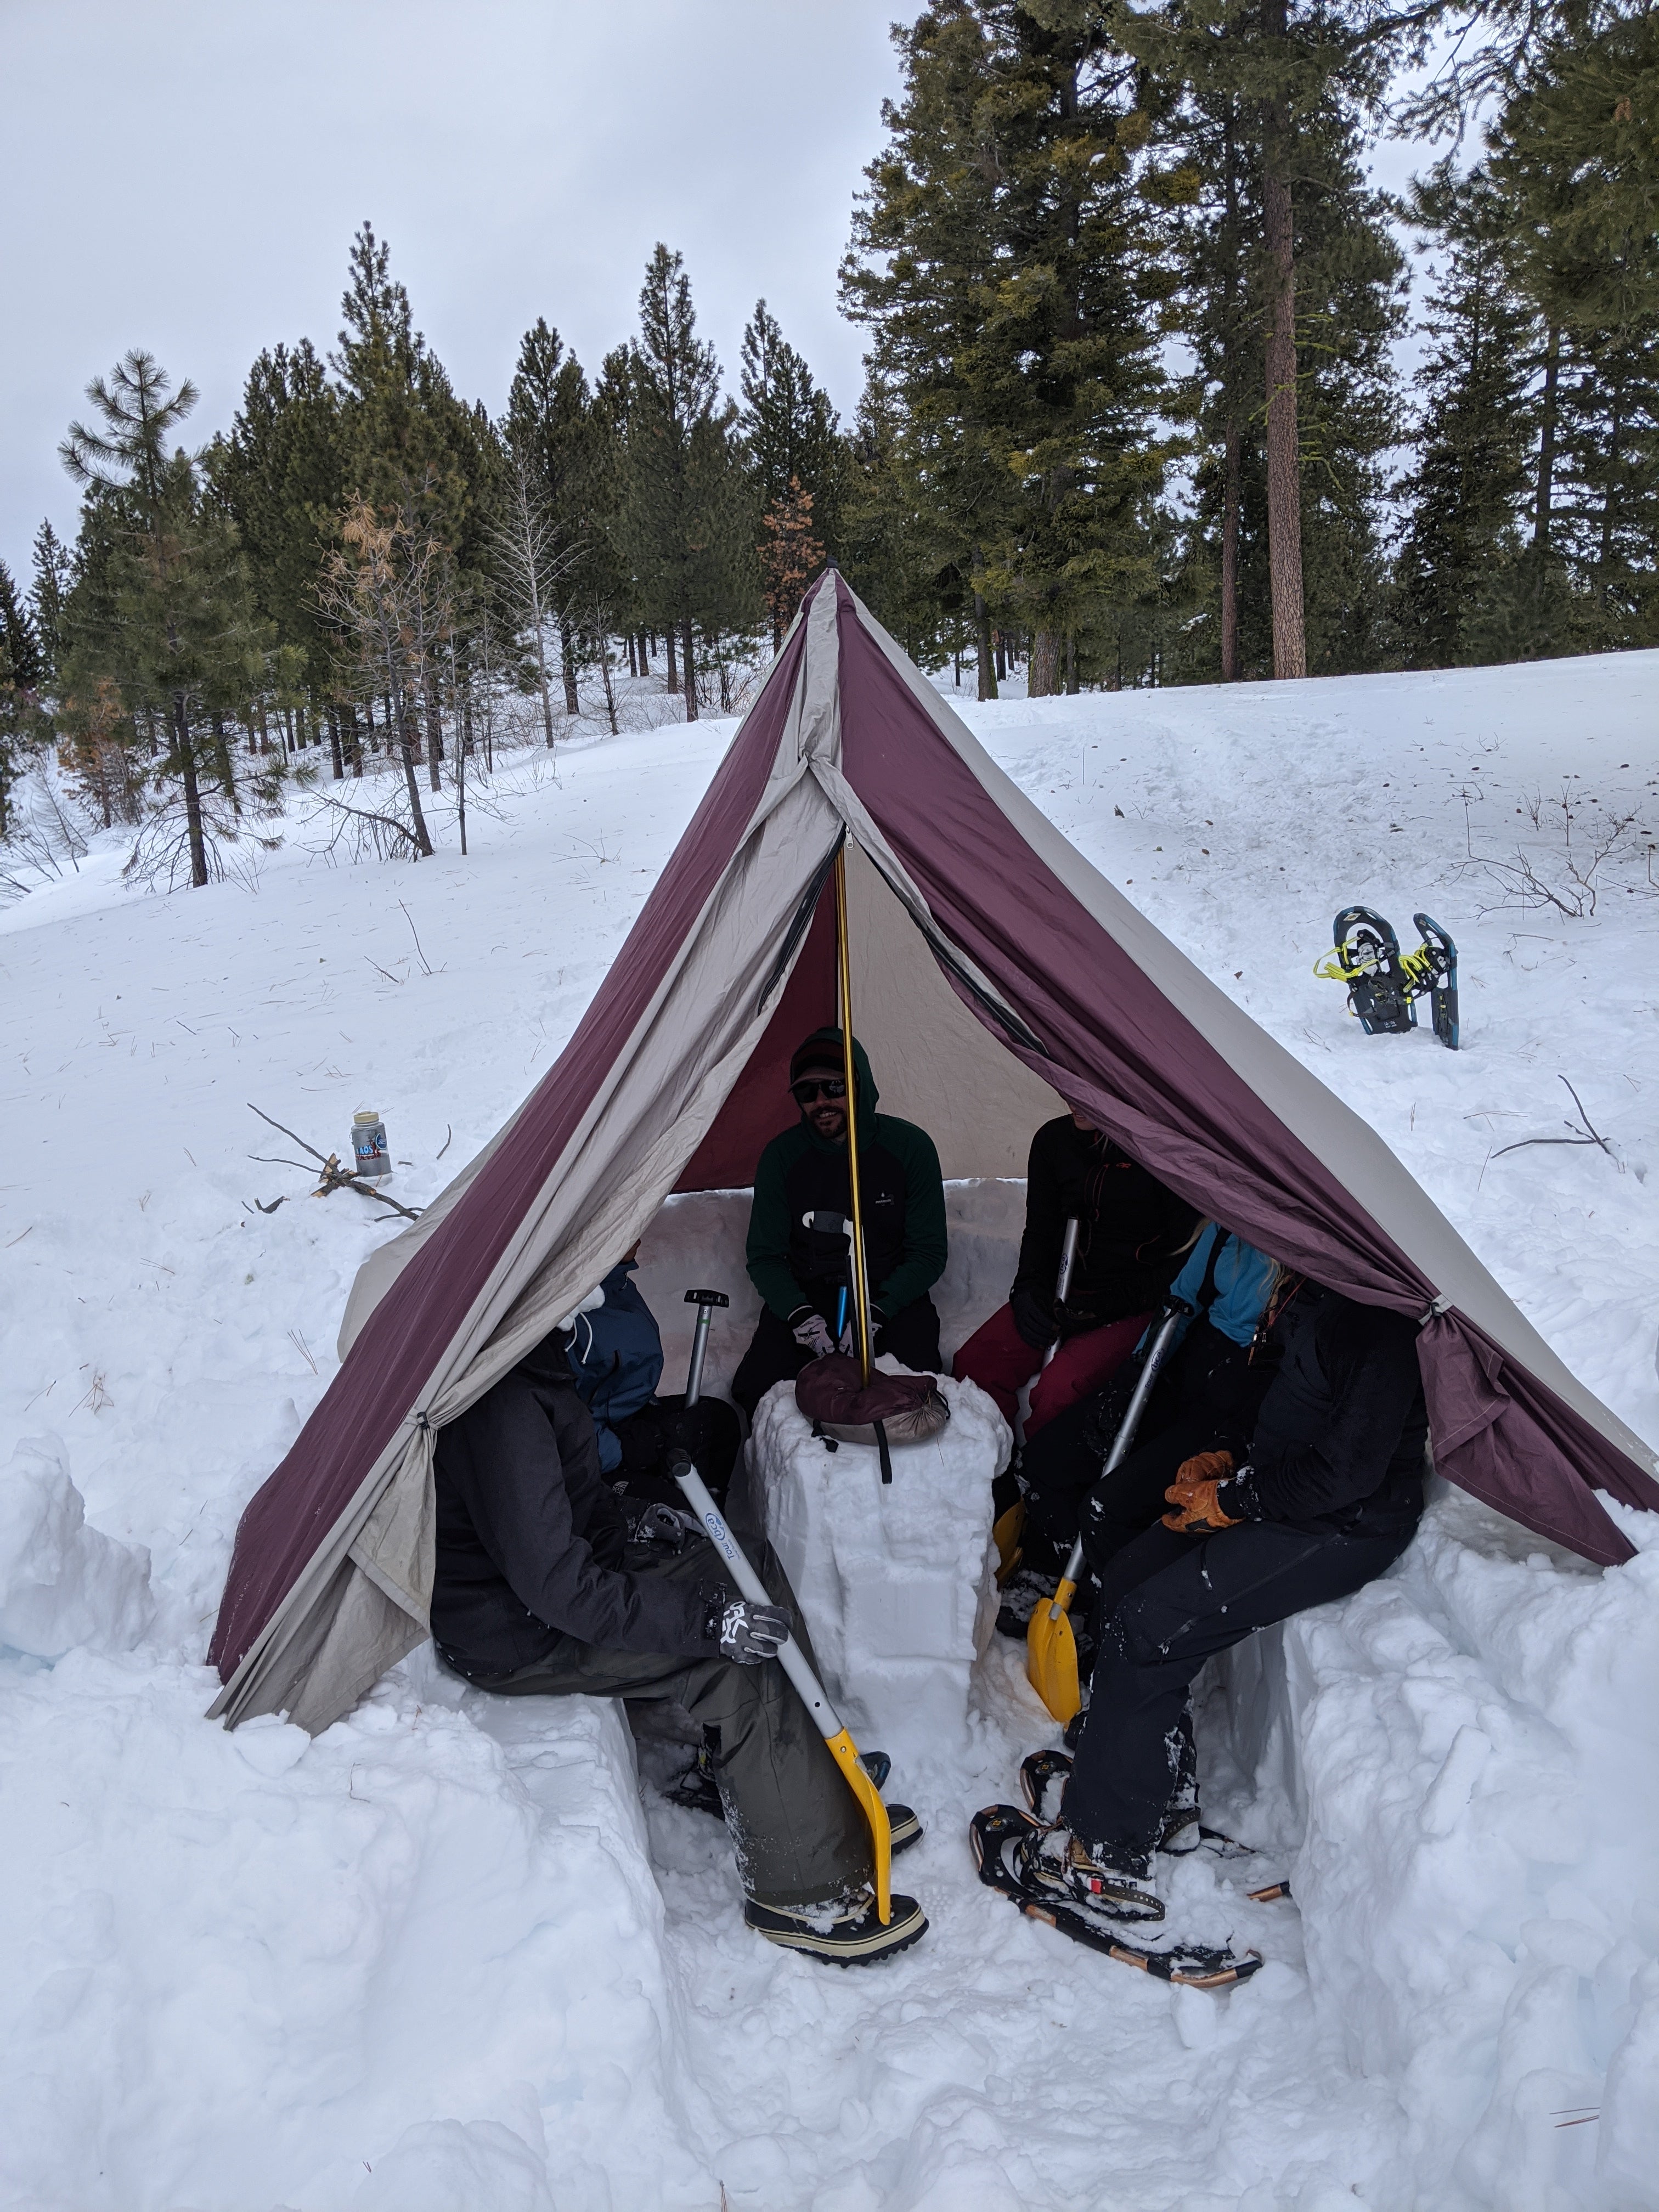 Camping in the snow.